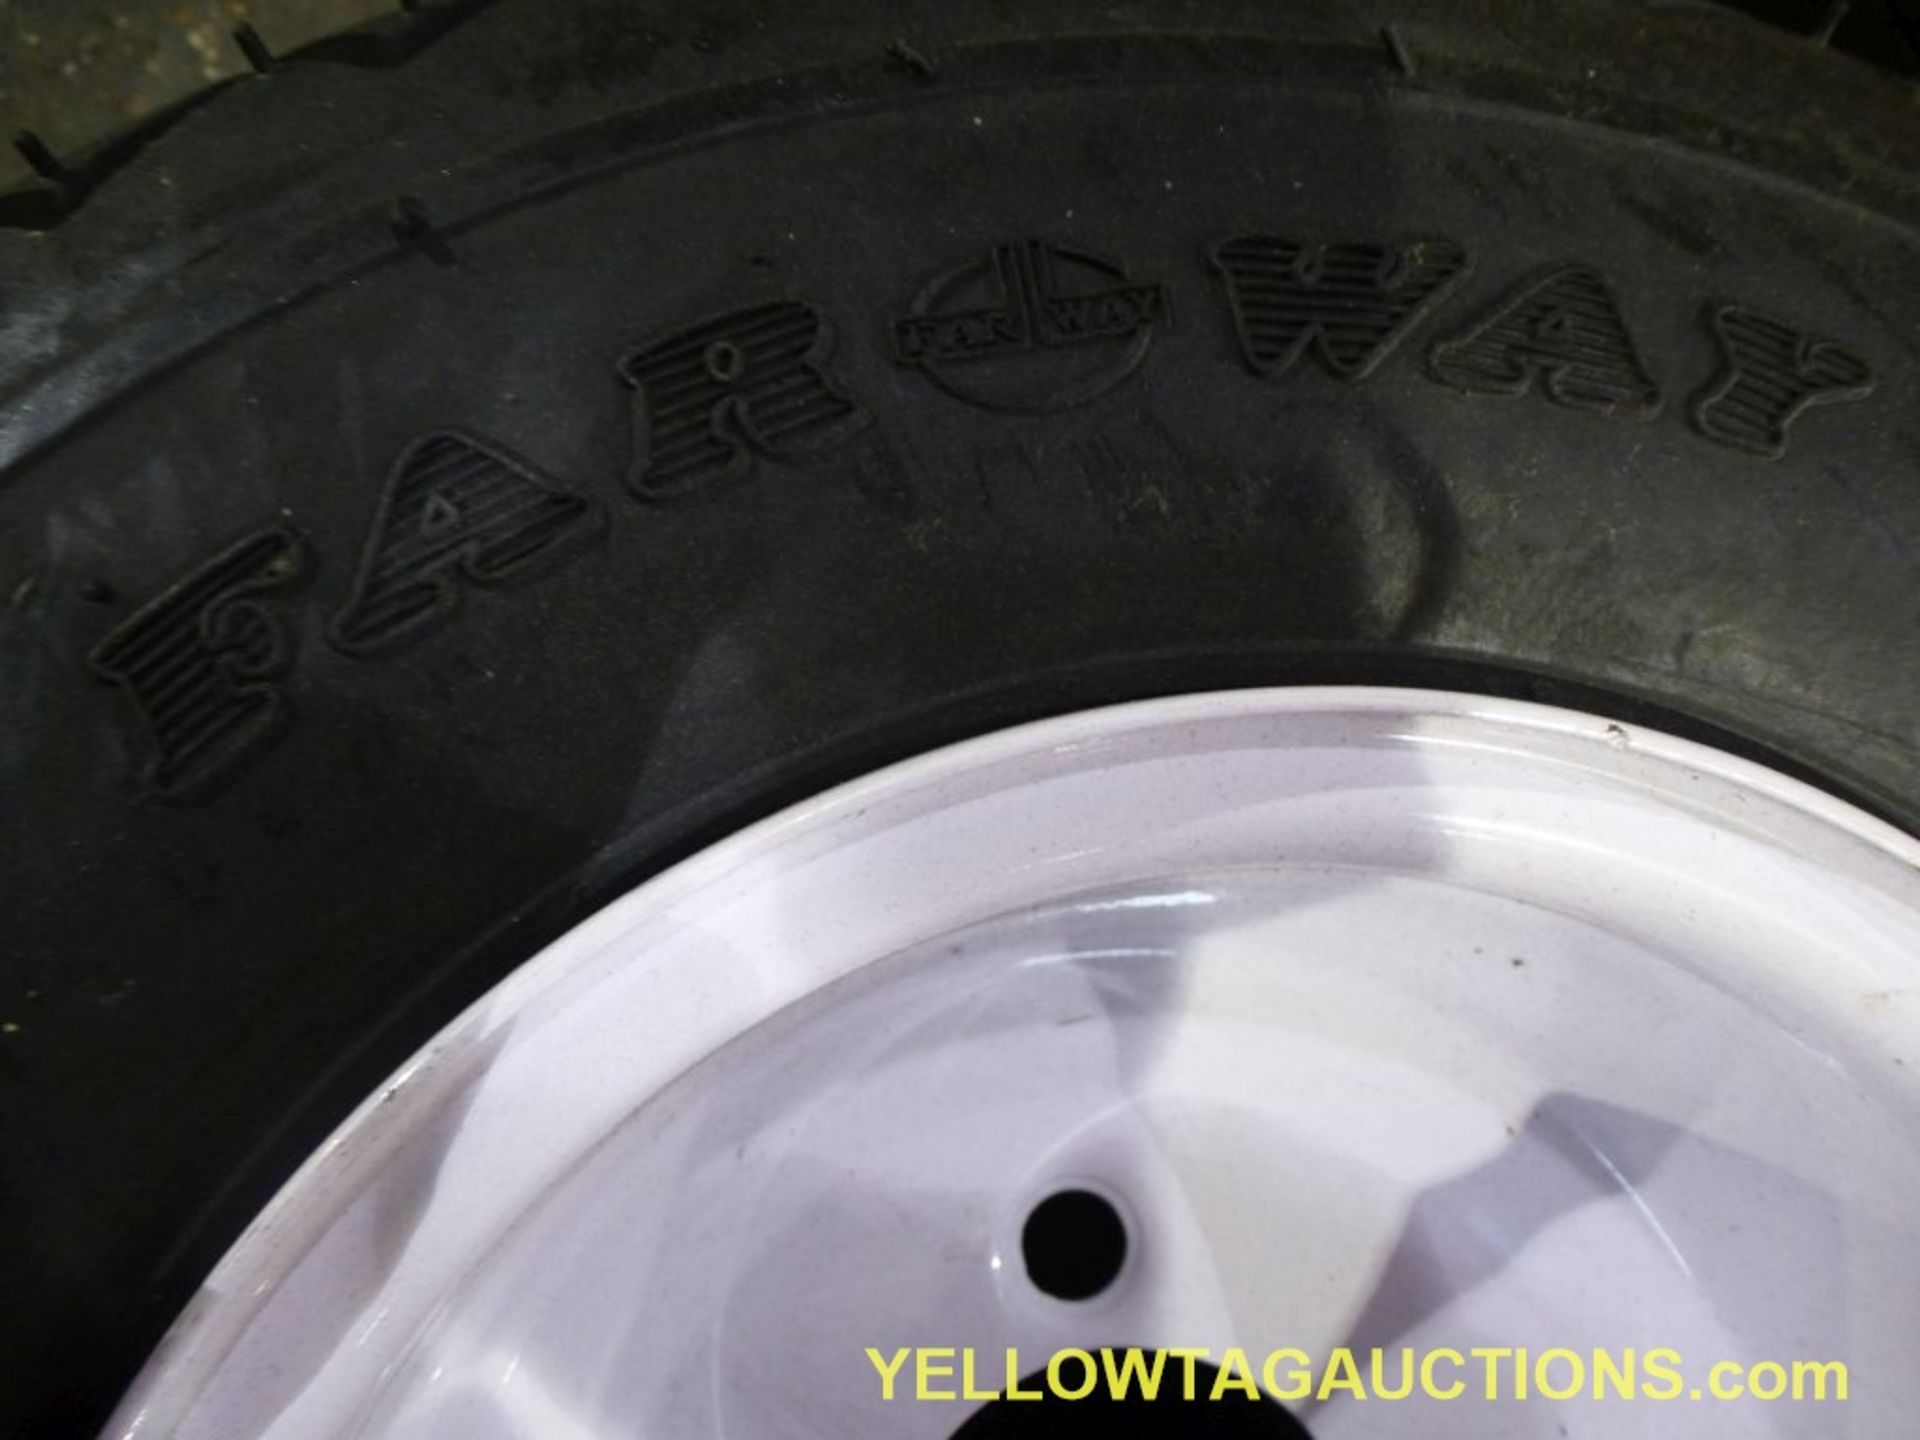 Lot of (12) FarWay 6-Ply Nylon Tires & Wheels|18 X 8.50 - 8NHS|Tag: 431 - Image 3 of 8